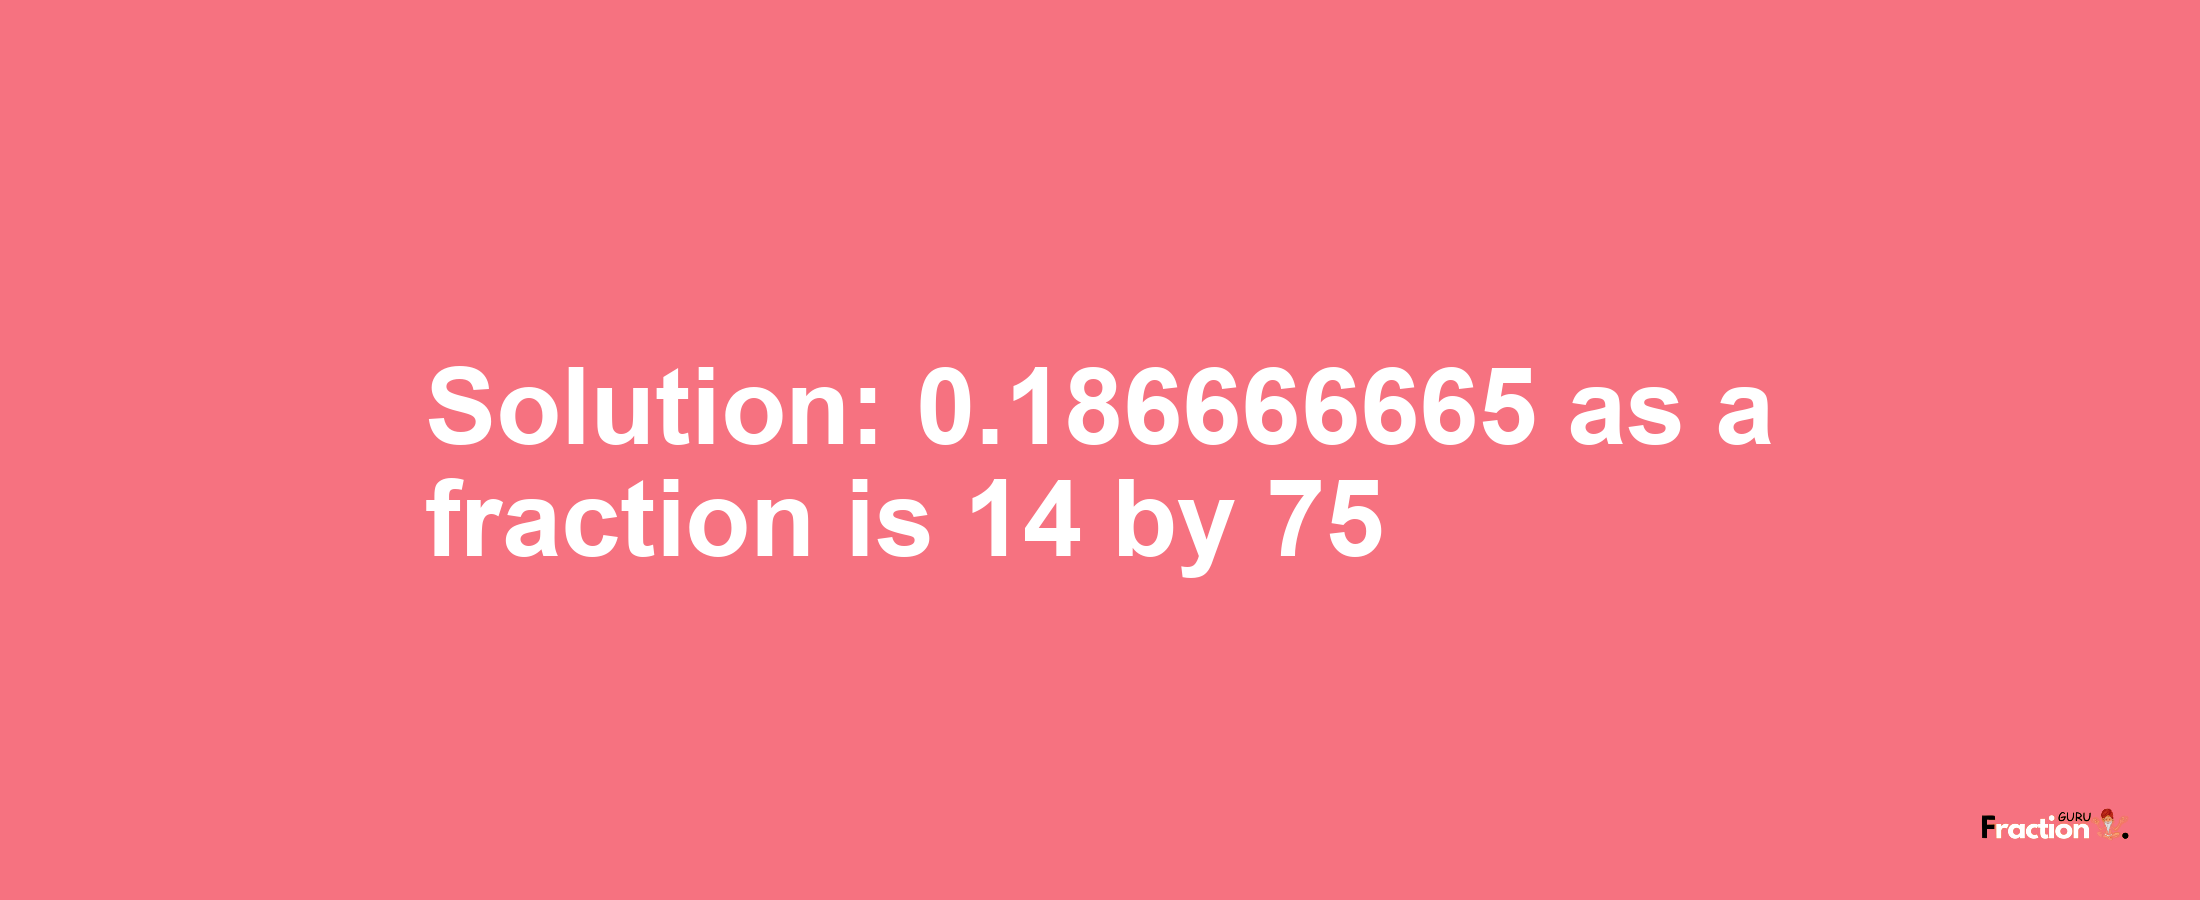 Solution:0.186666665 as a fraction is 14/75